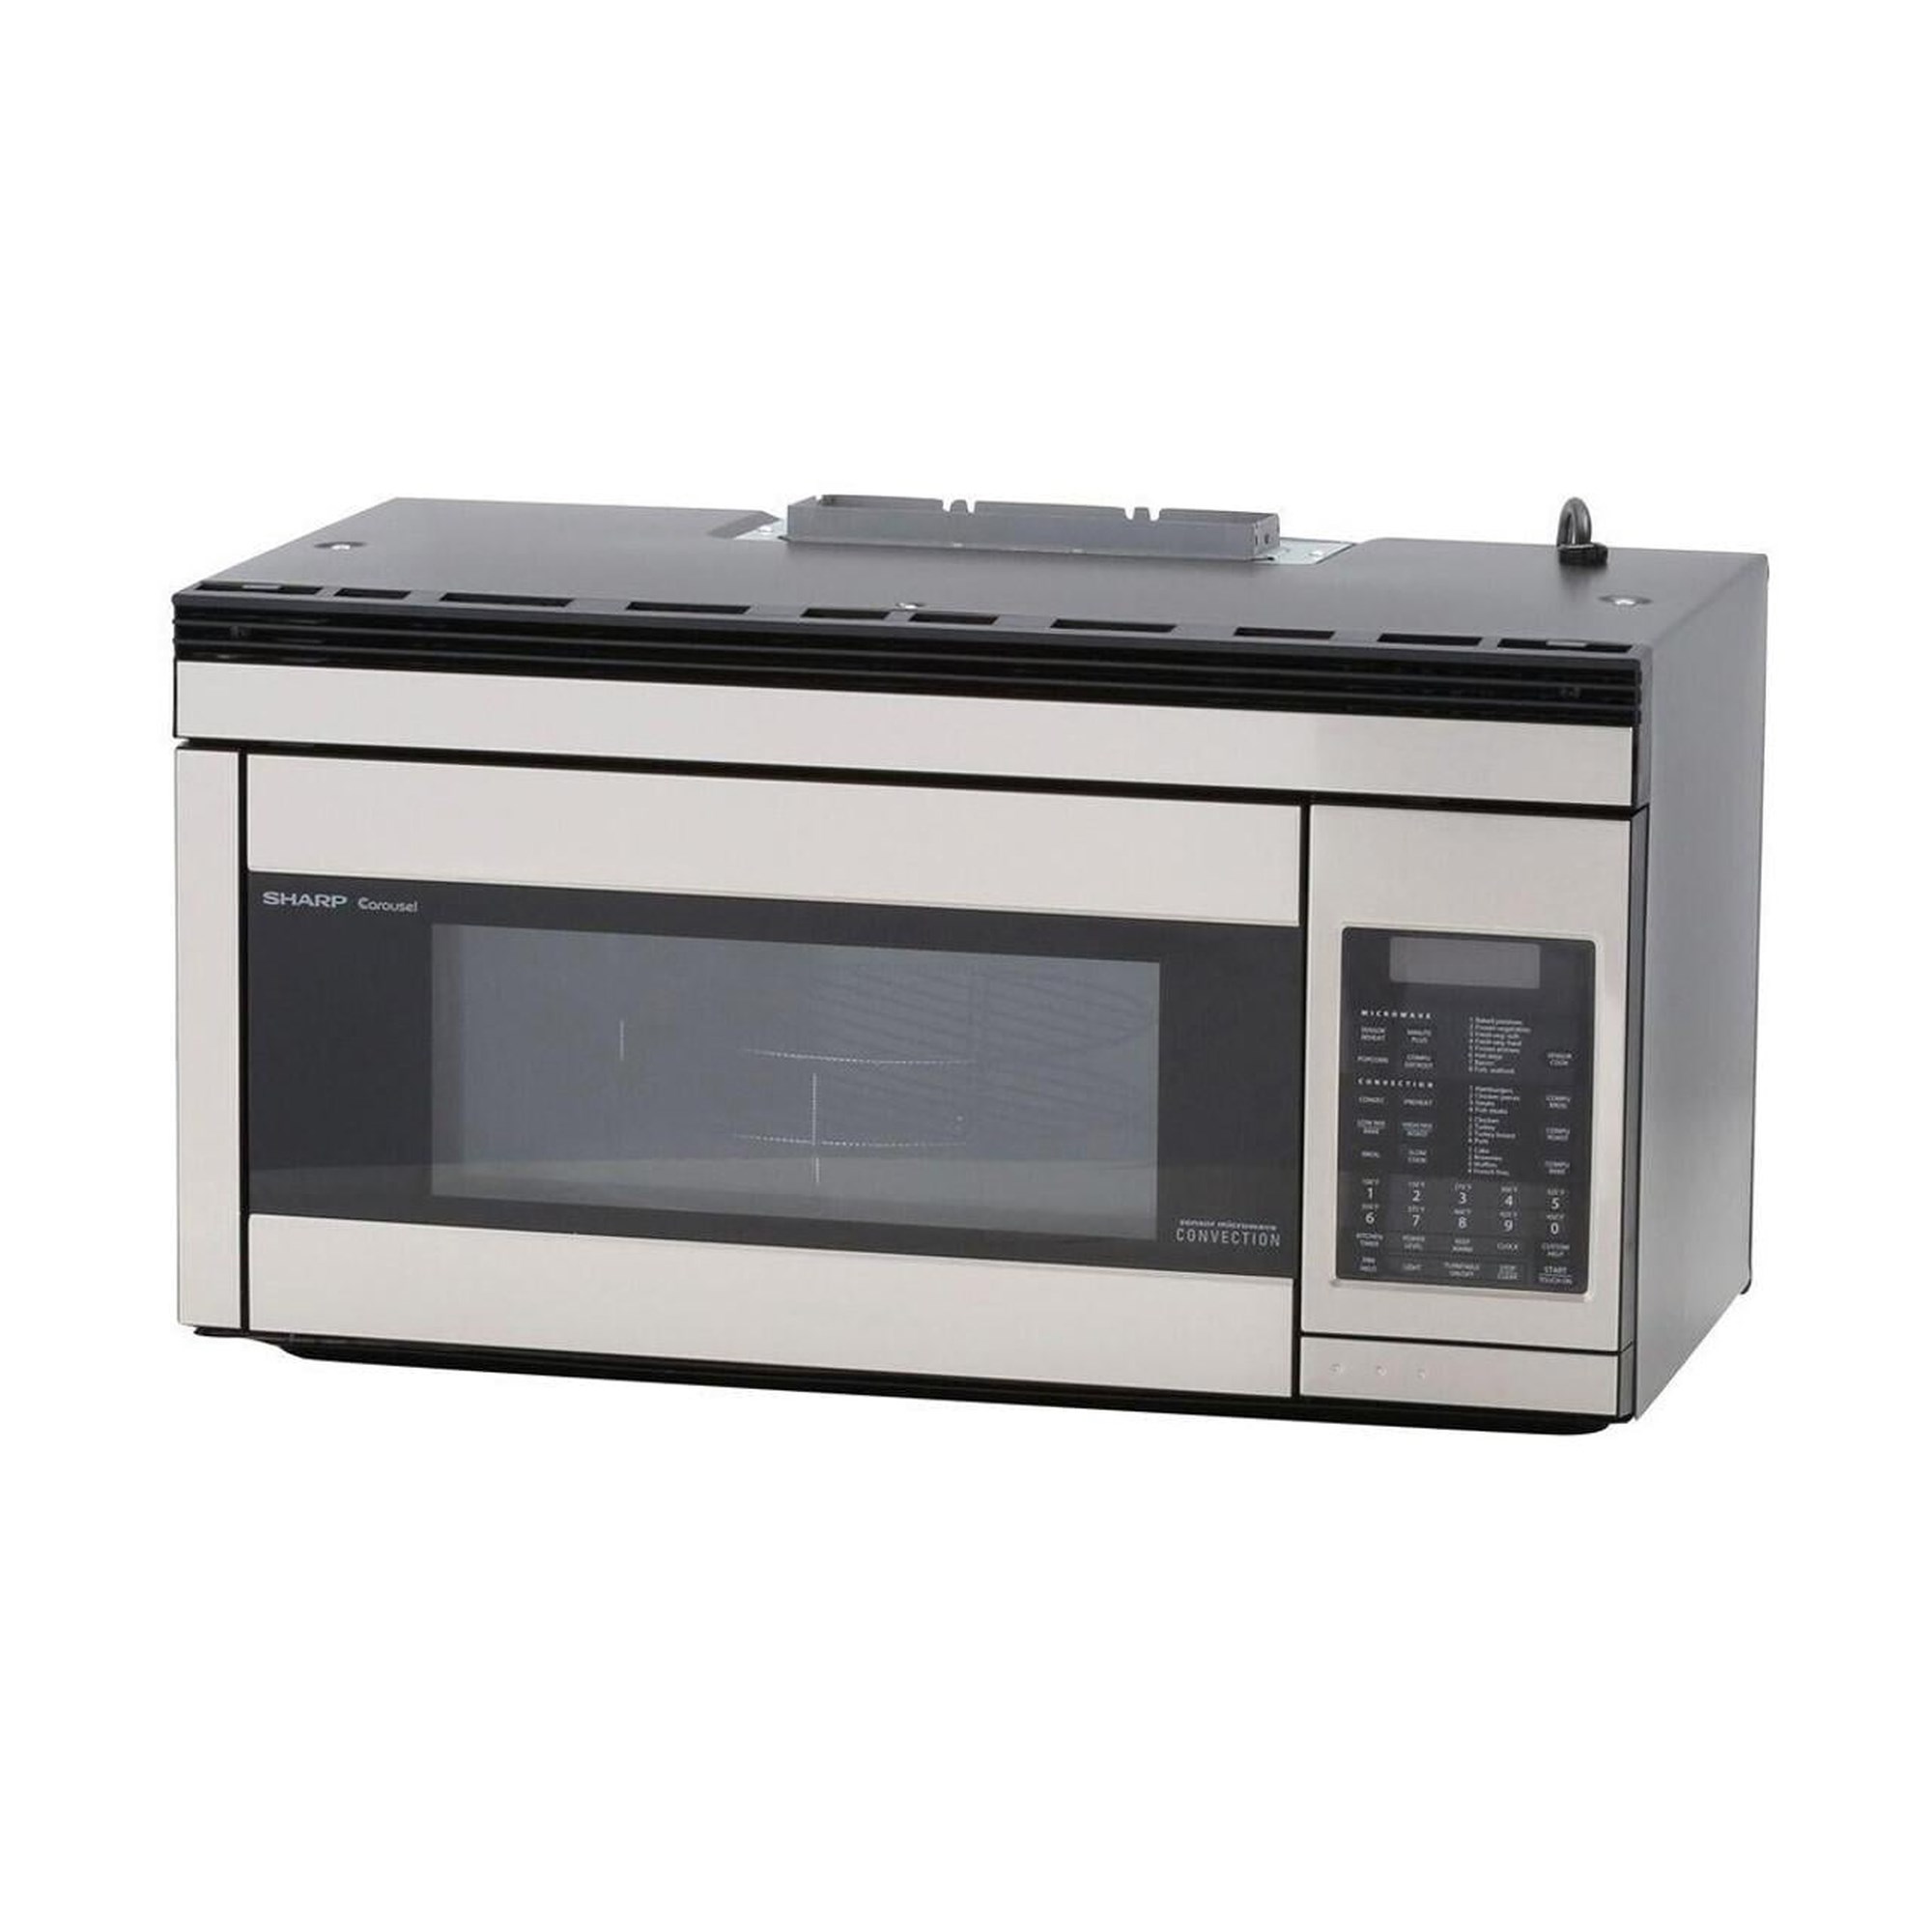 Simply Perfect 1.1 Cu. Ft. Stainless Steel Microwave Oven, Microwave Ovens, Furniture & Appliances